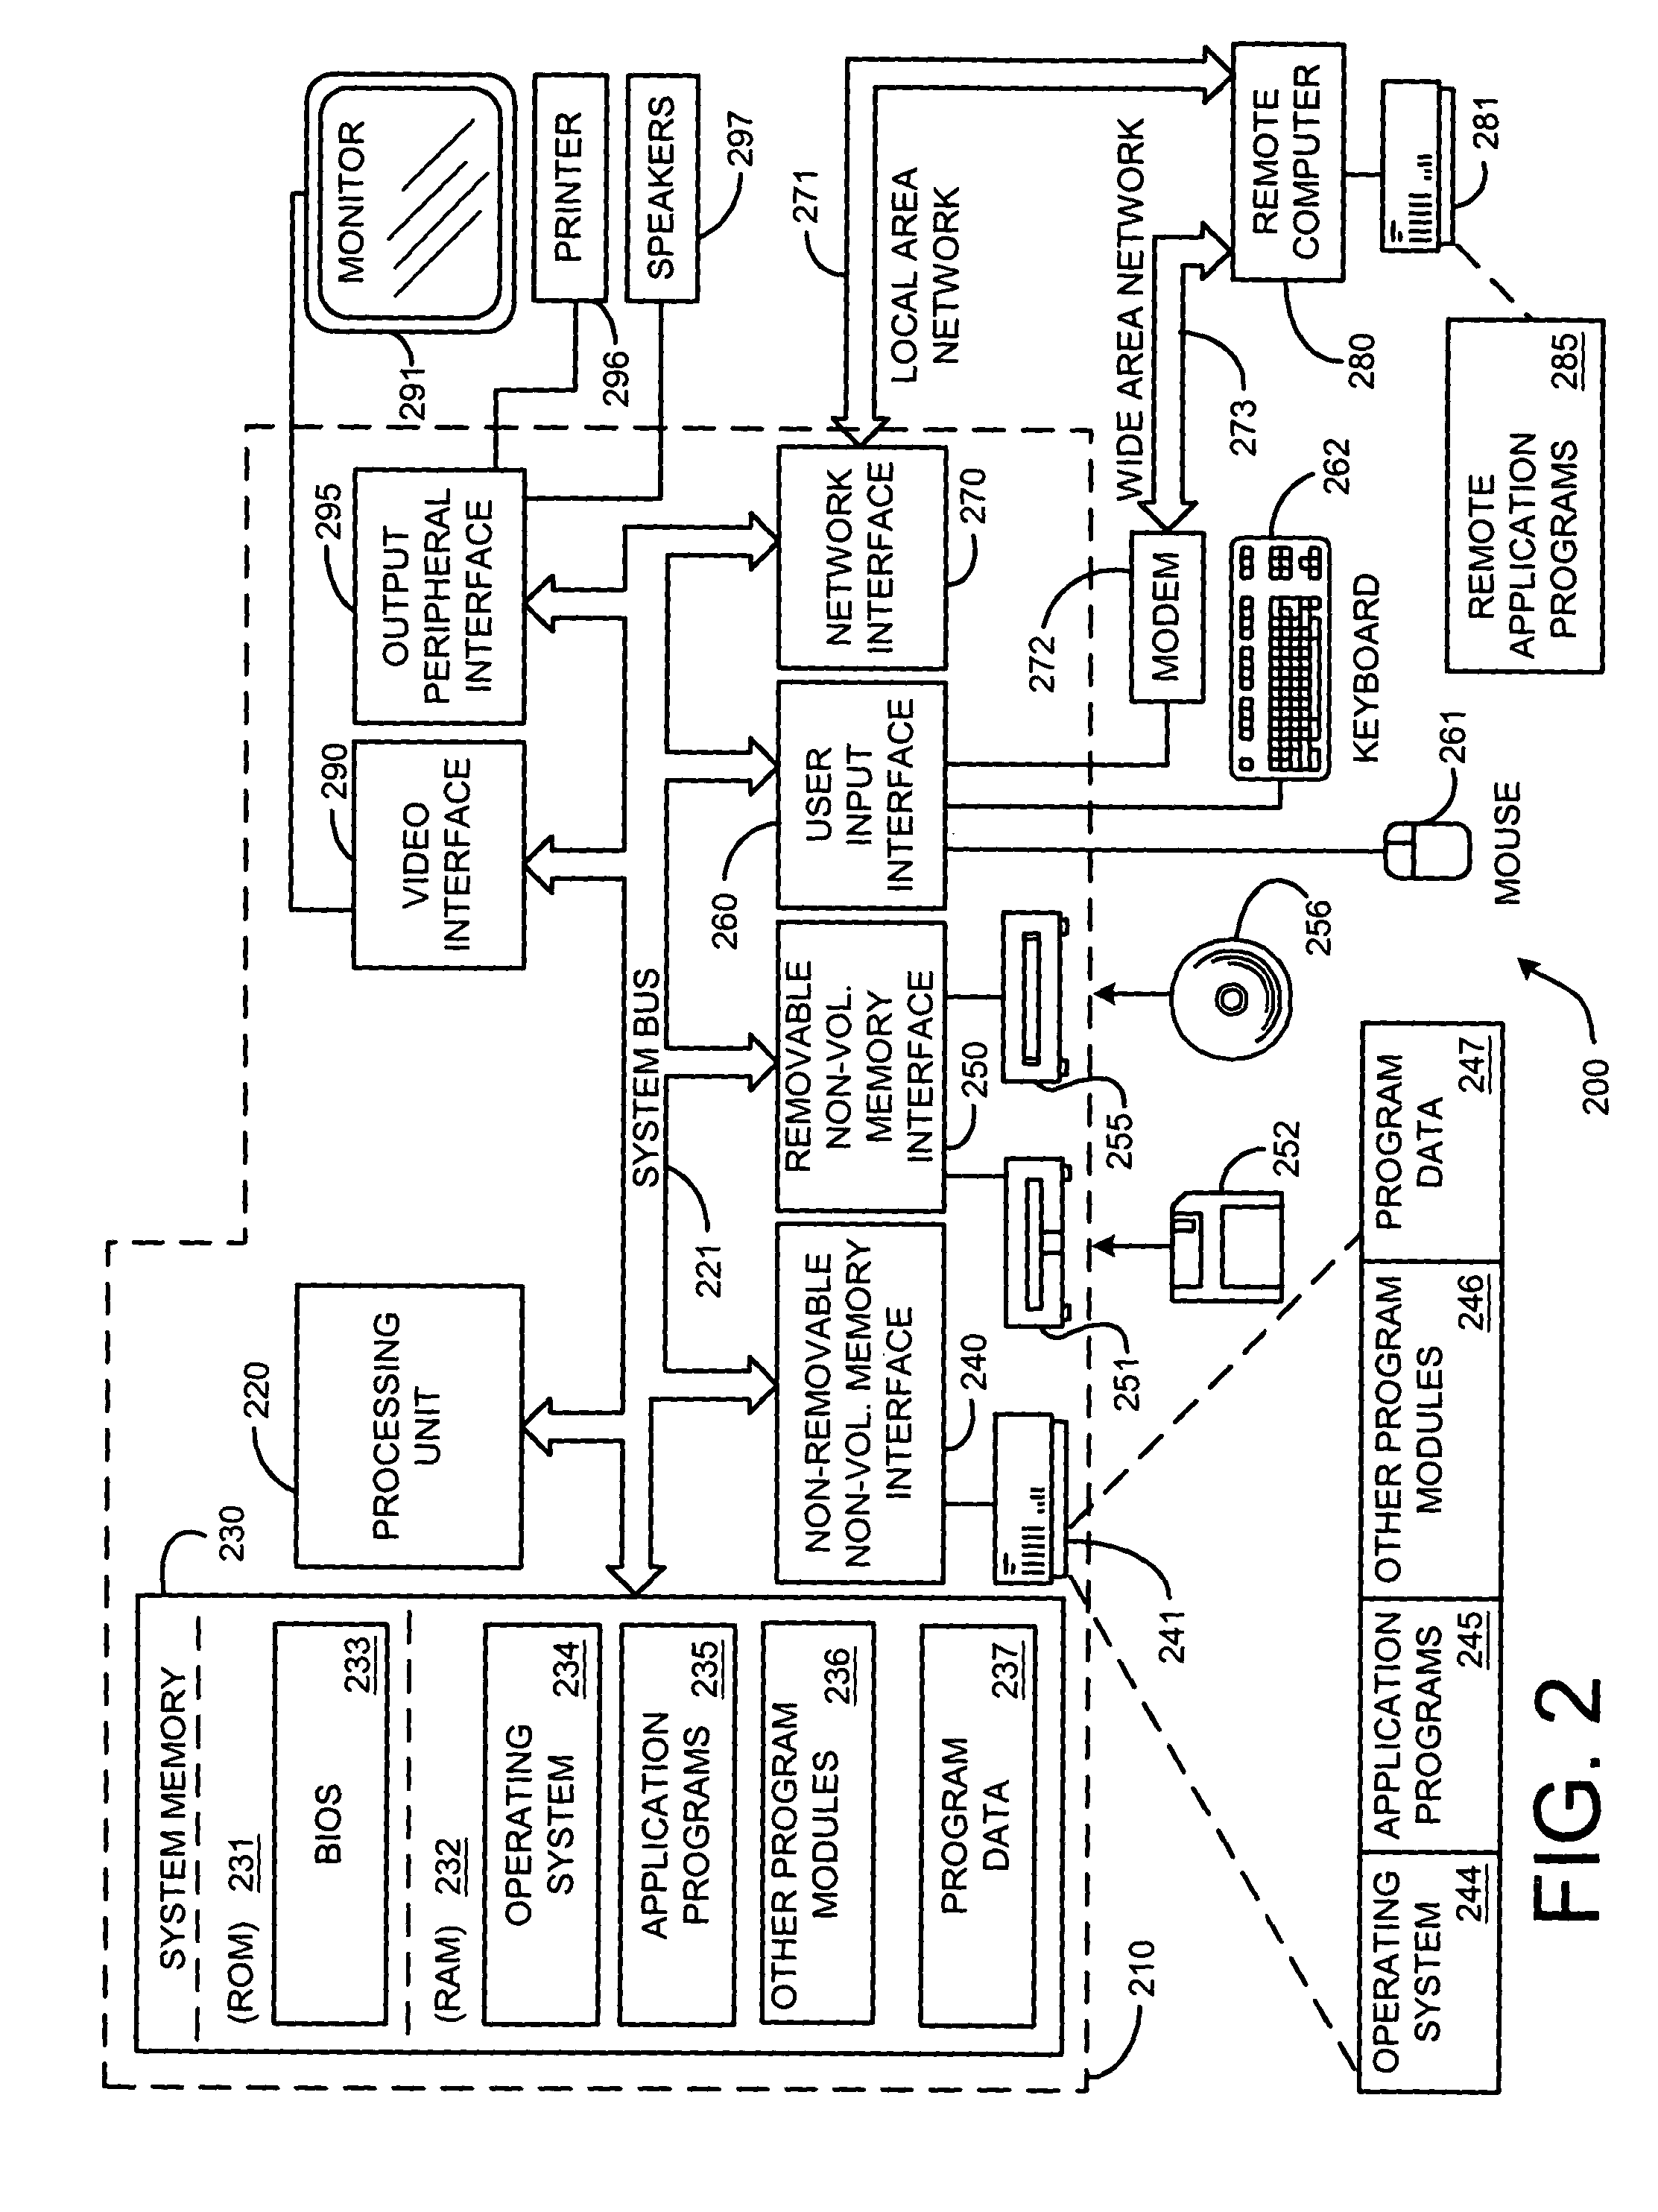 Optimized fixed-point mathematical library and graphics functions for a software-implemented graphics rendering system and method using a normalized homogenous coordinate system